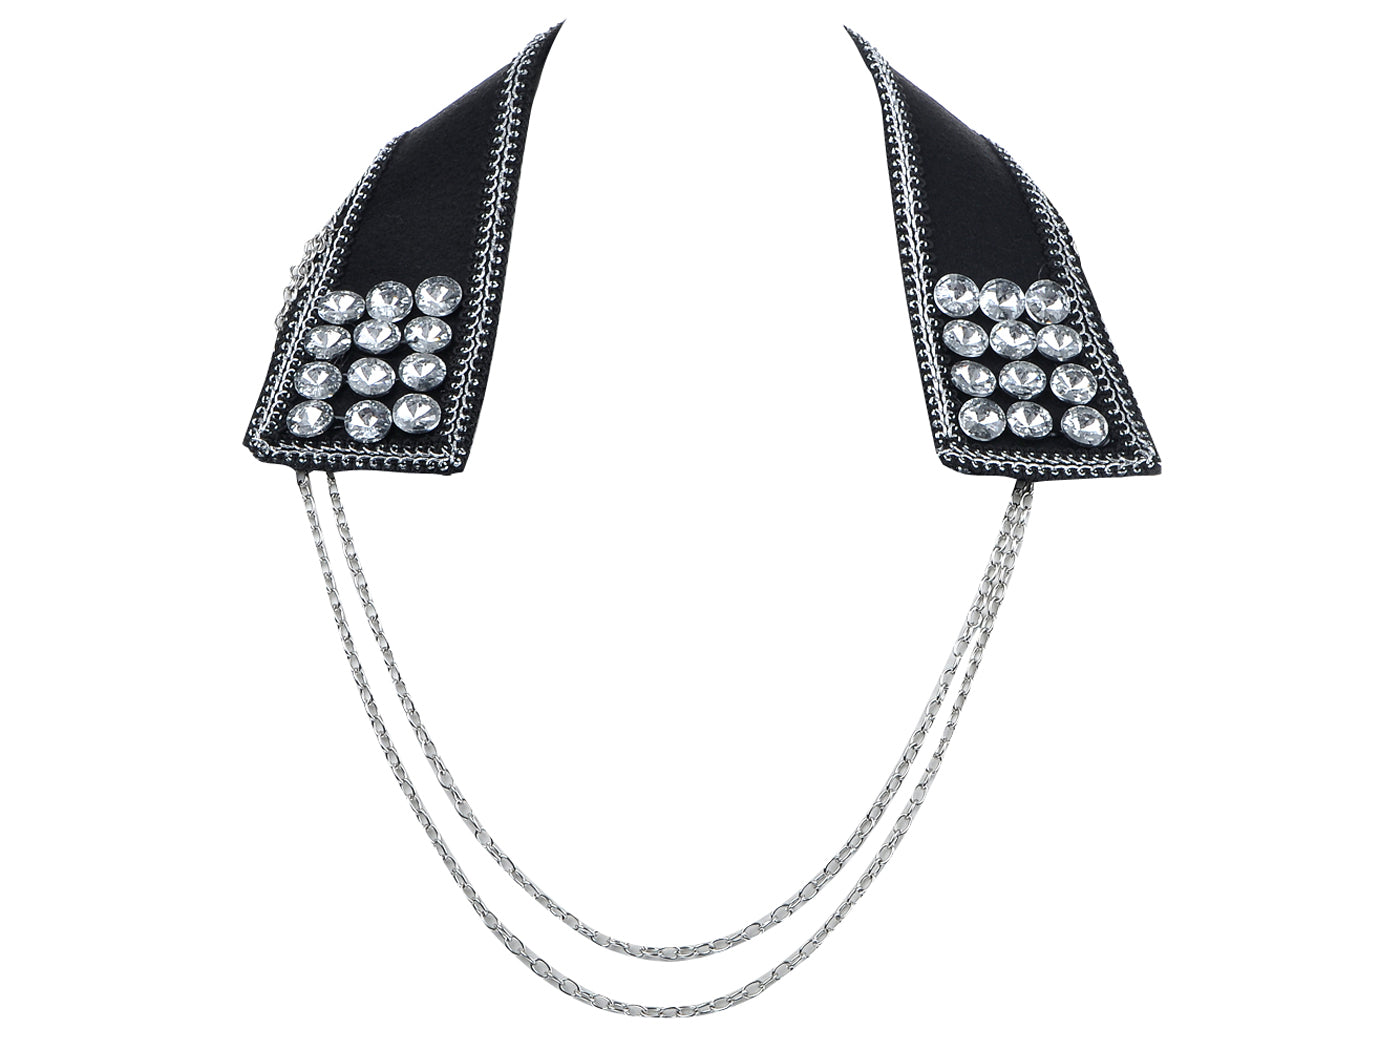 Black Embellish Collar With Draping Chains Necklace